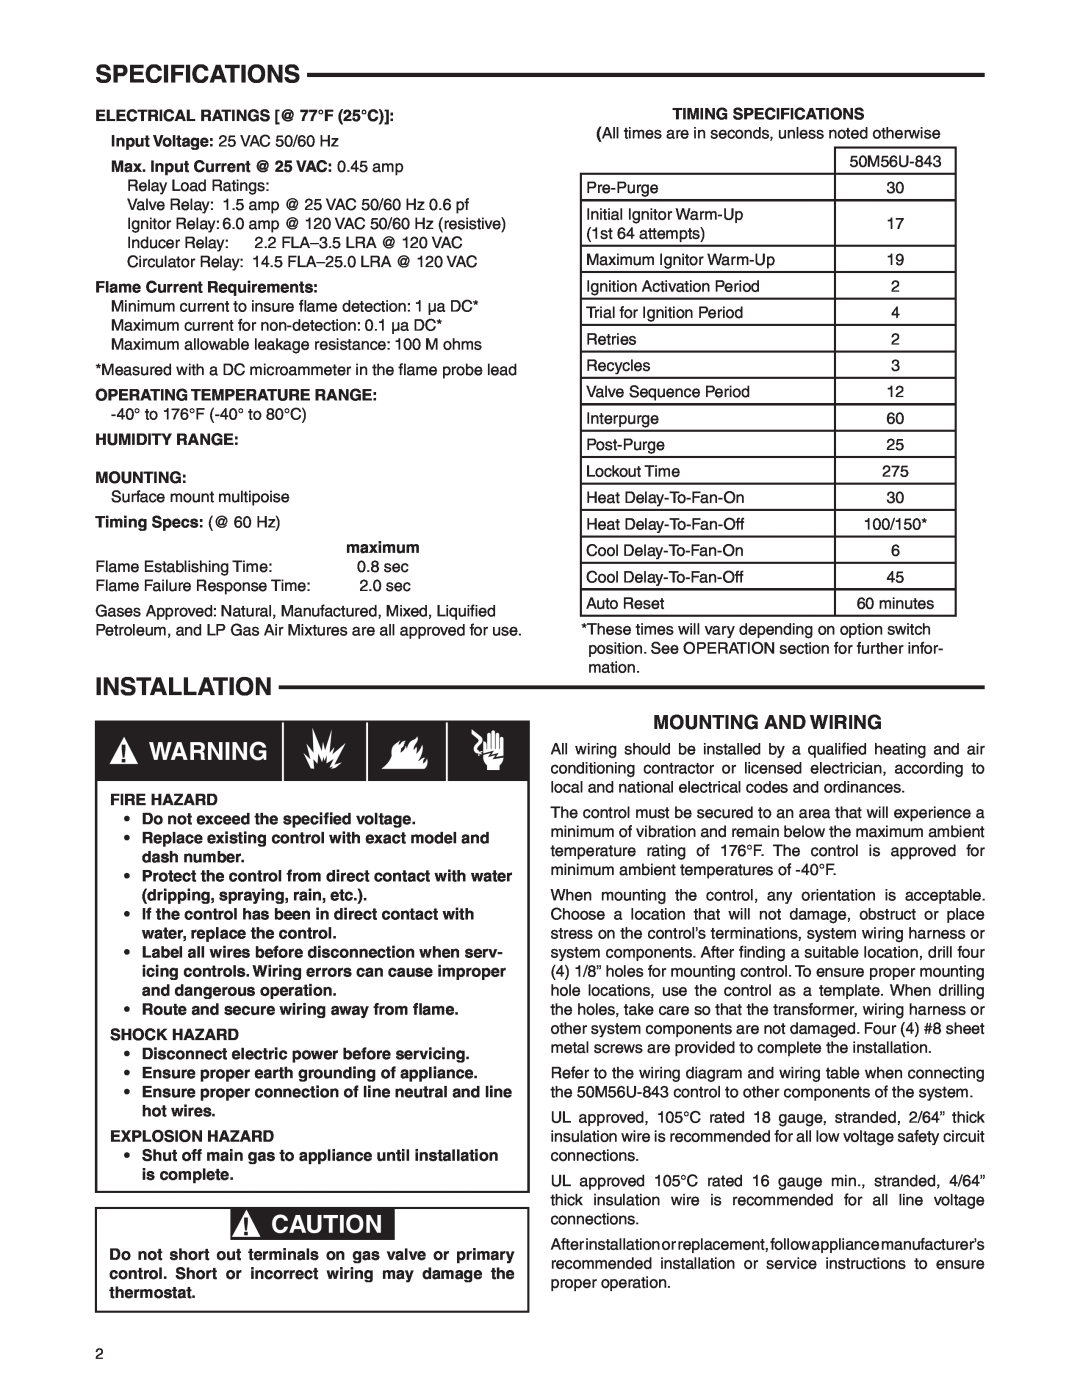 White Rodgers 50M56U-843 installation instructions Specifications, Installation, Mounting And Wiring 